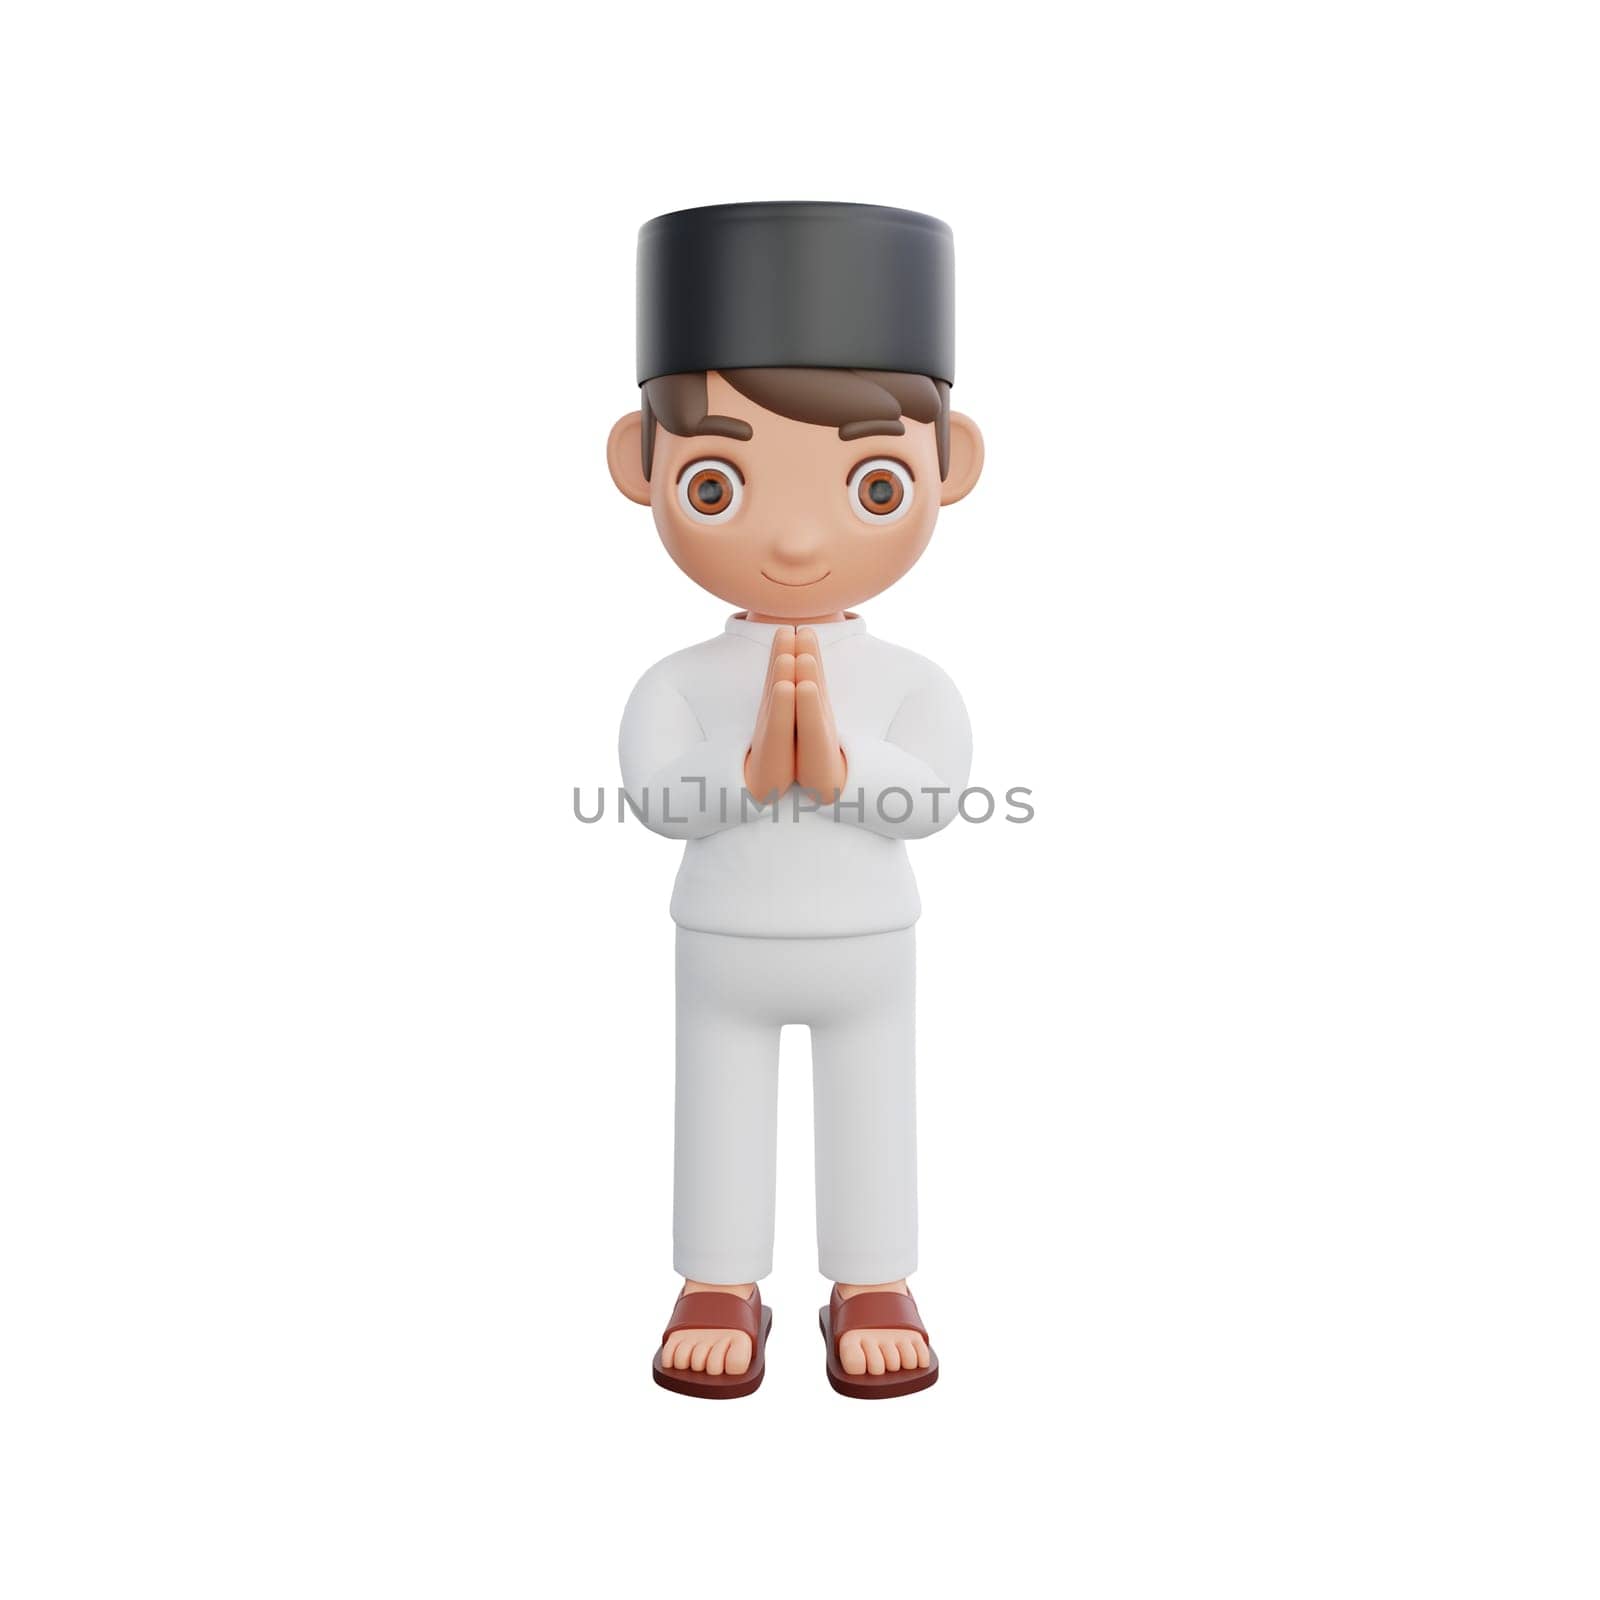 3D Illustration of Muslim character with the gesture of Salam by Rahmat_Djayusman